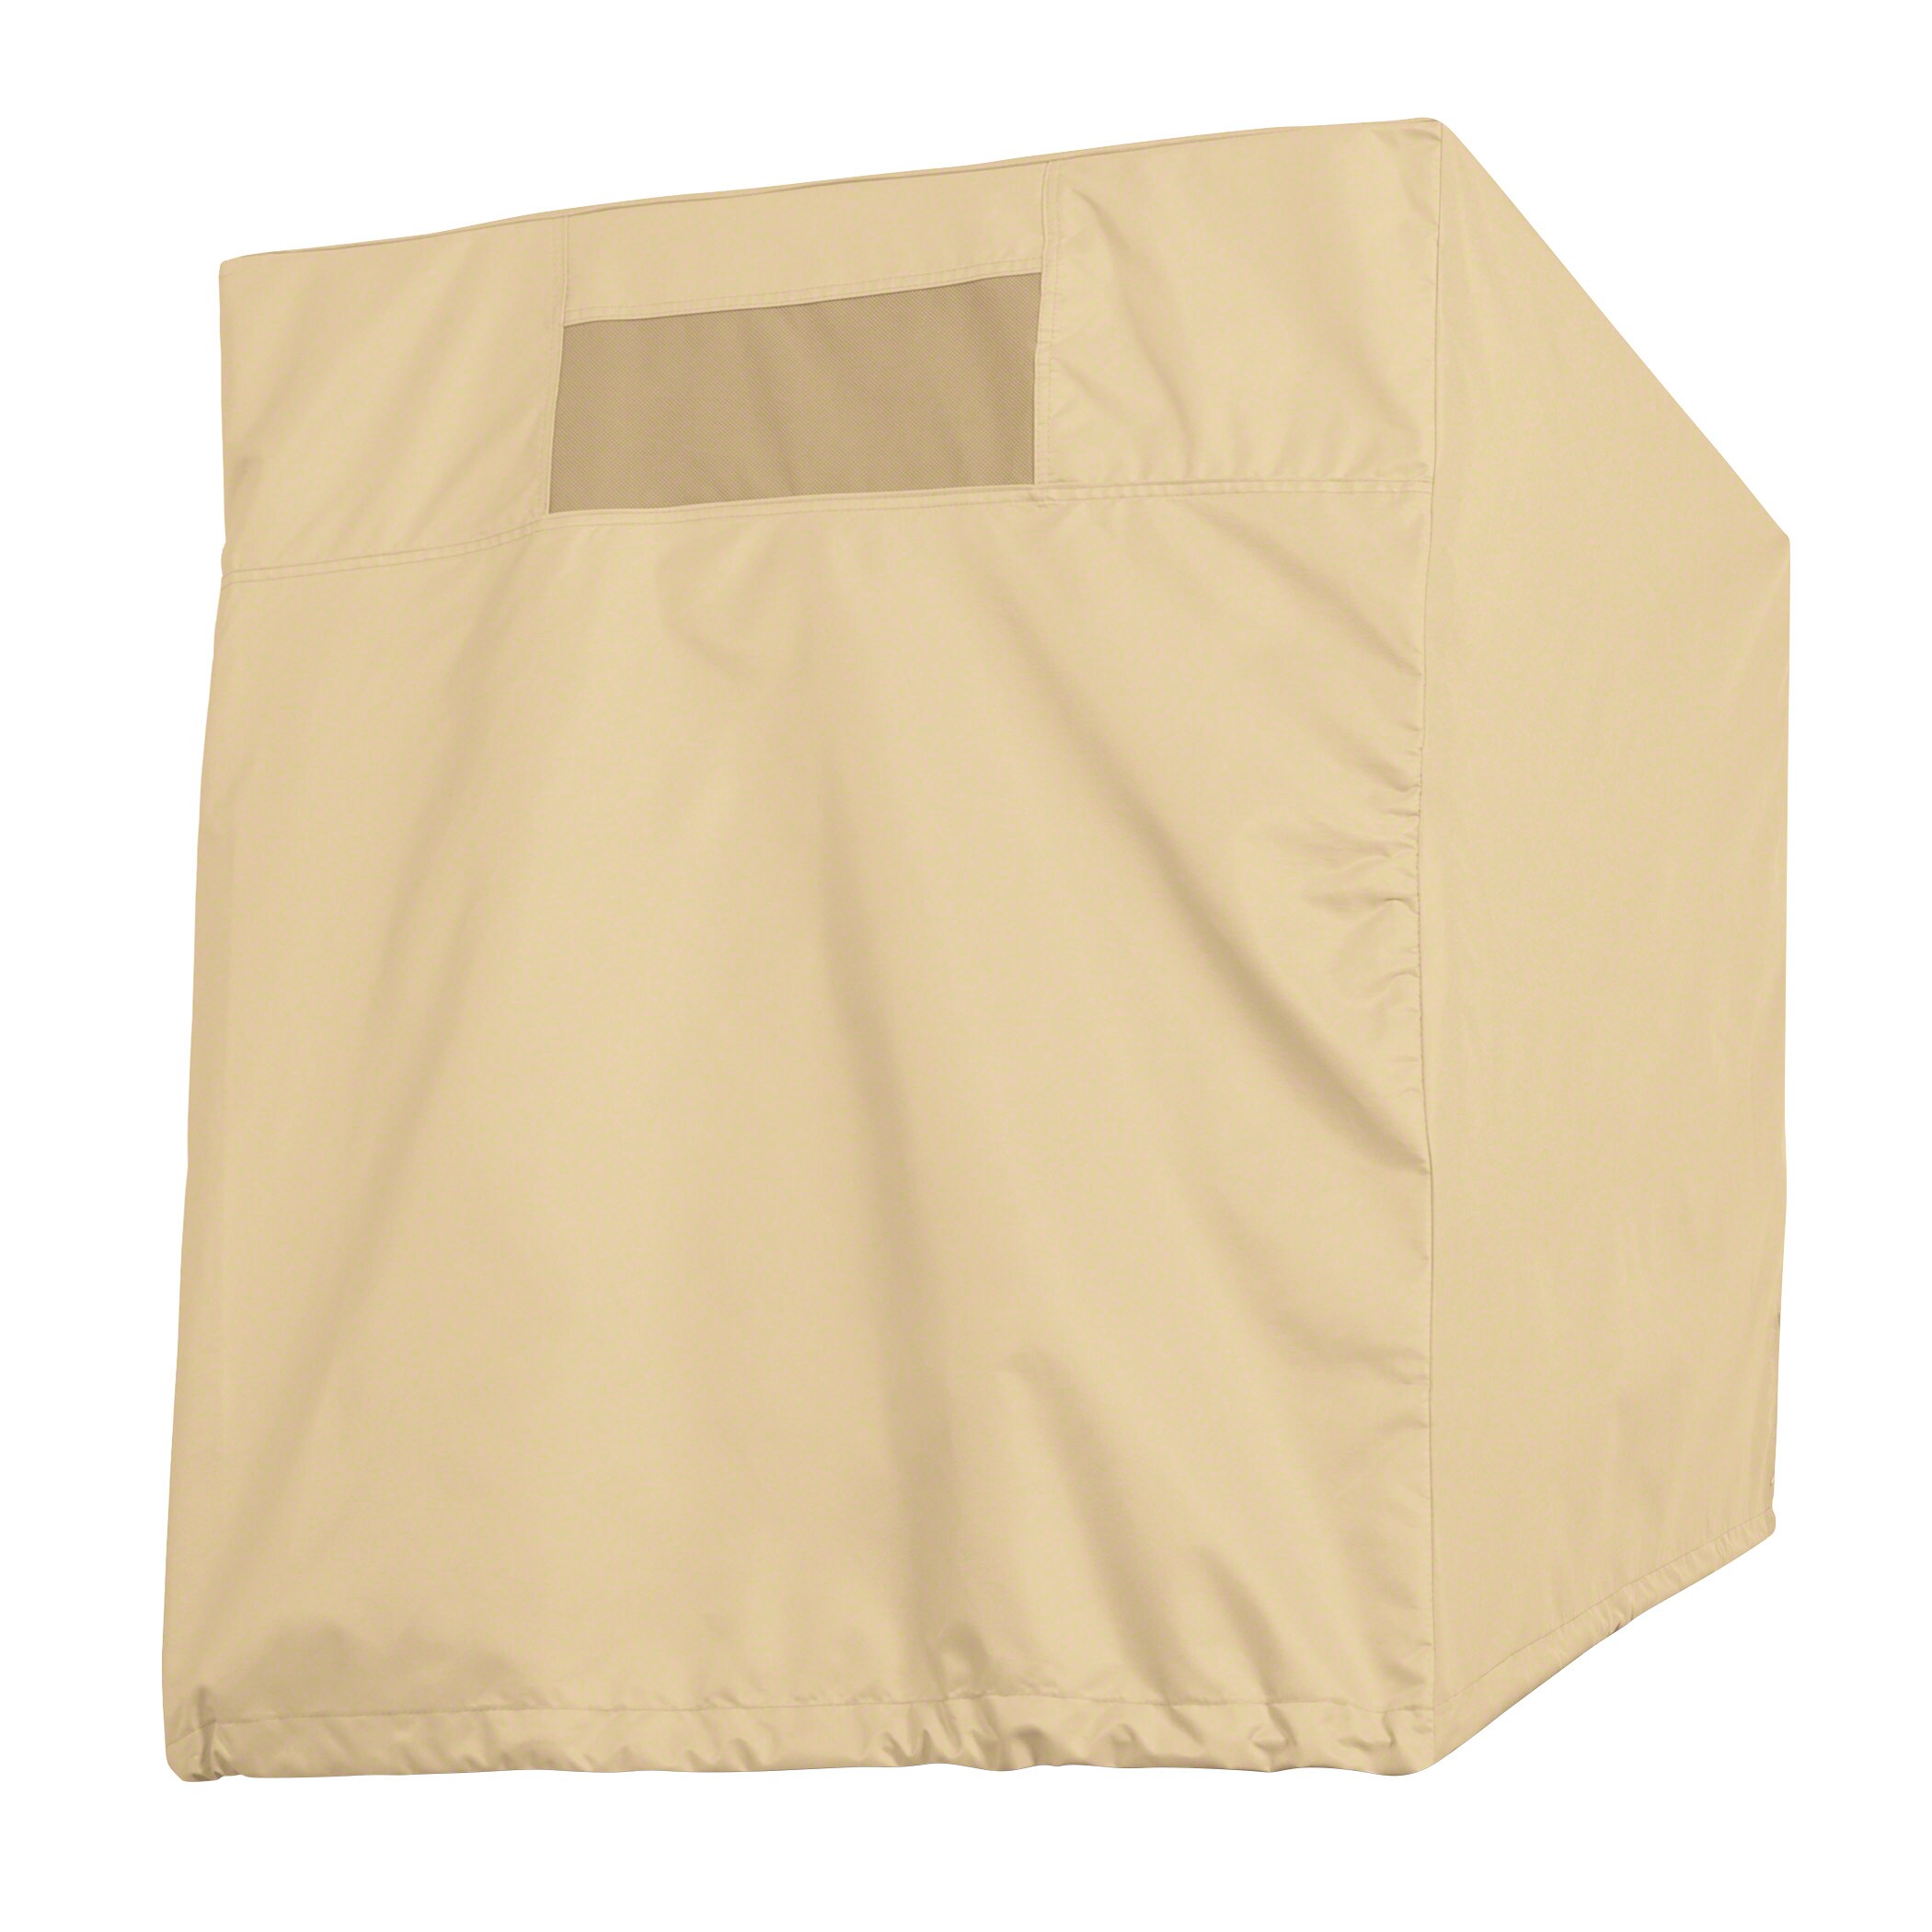 Dial Manufacturing Evaporative Cooler Cover Down Draft WeatherGuard Inc.